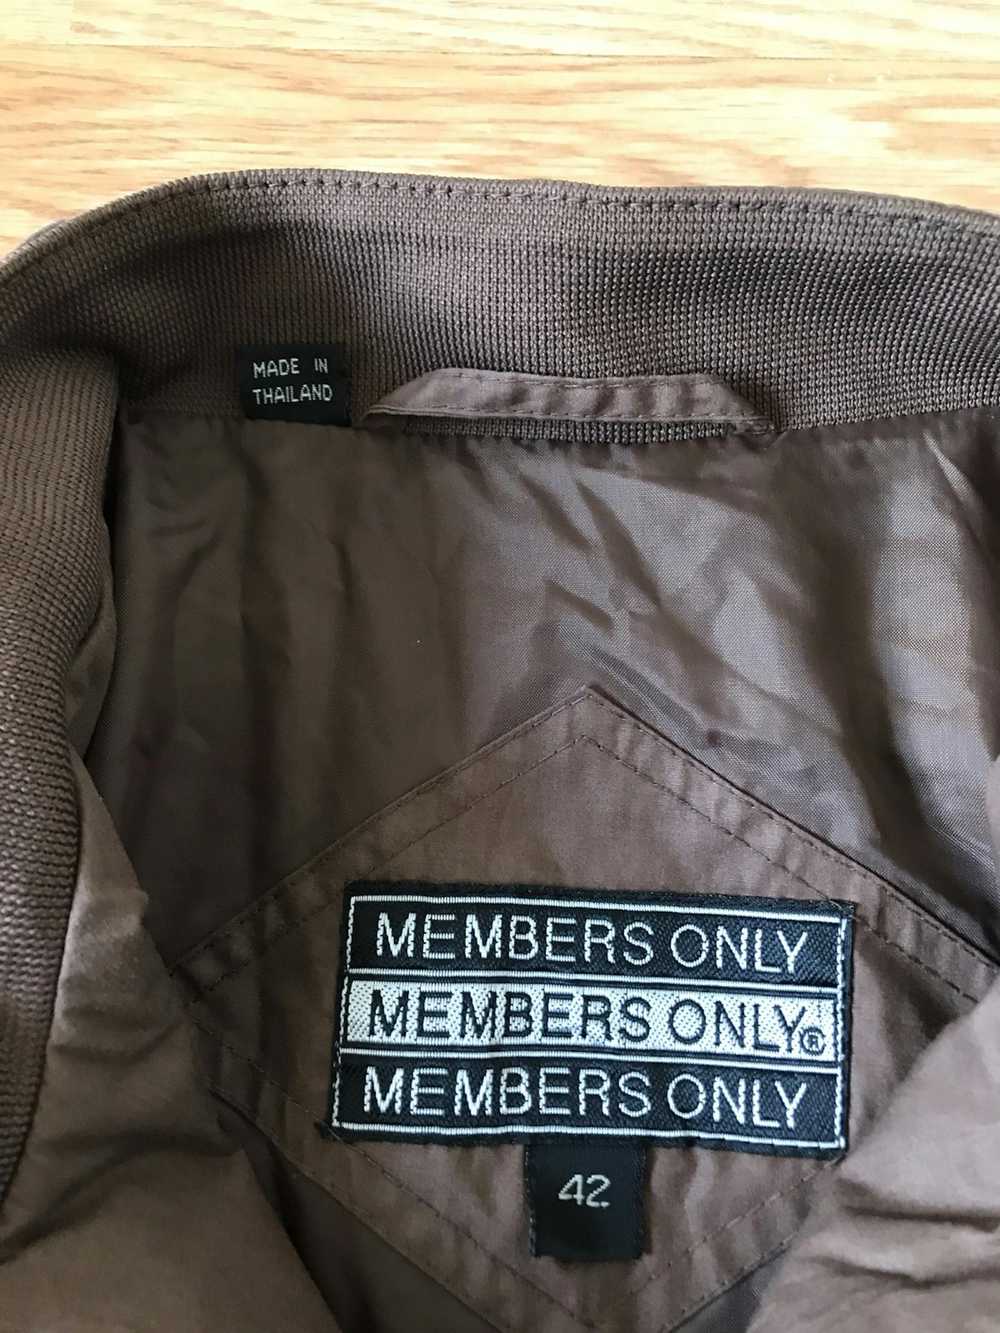 Members Only Members only X Vintage - image 2